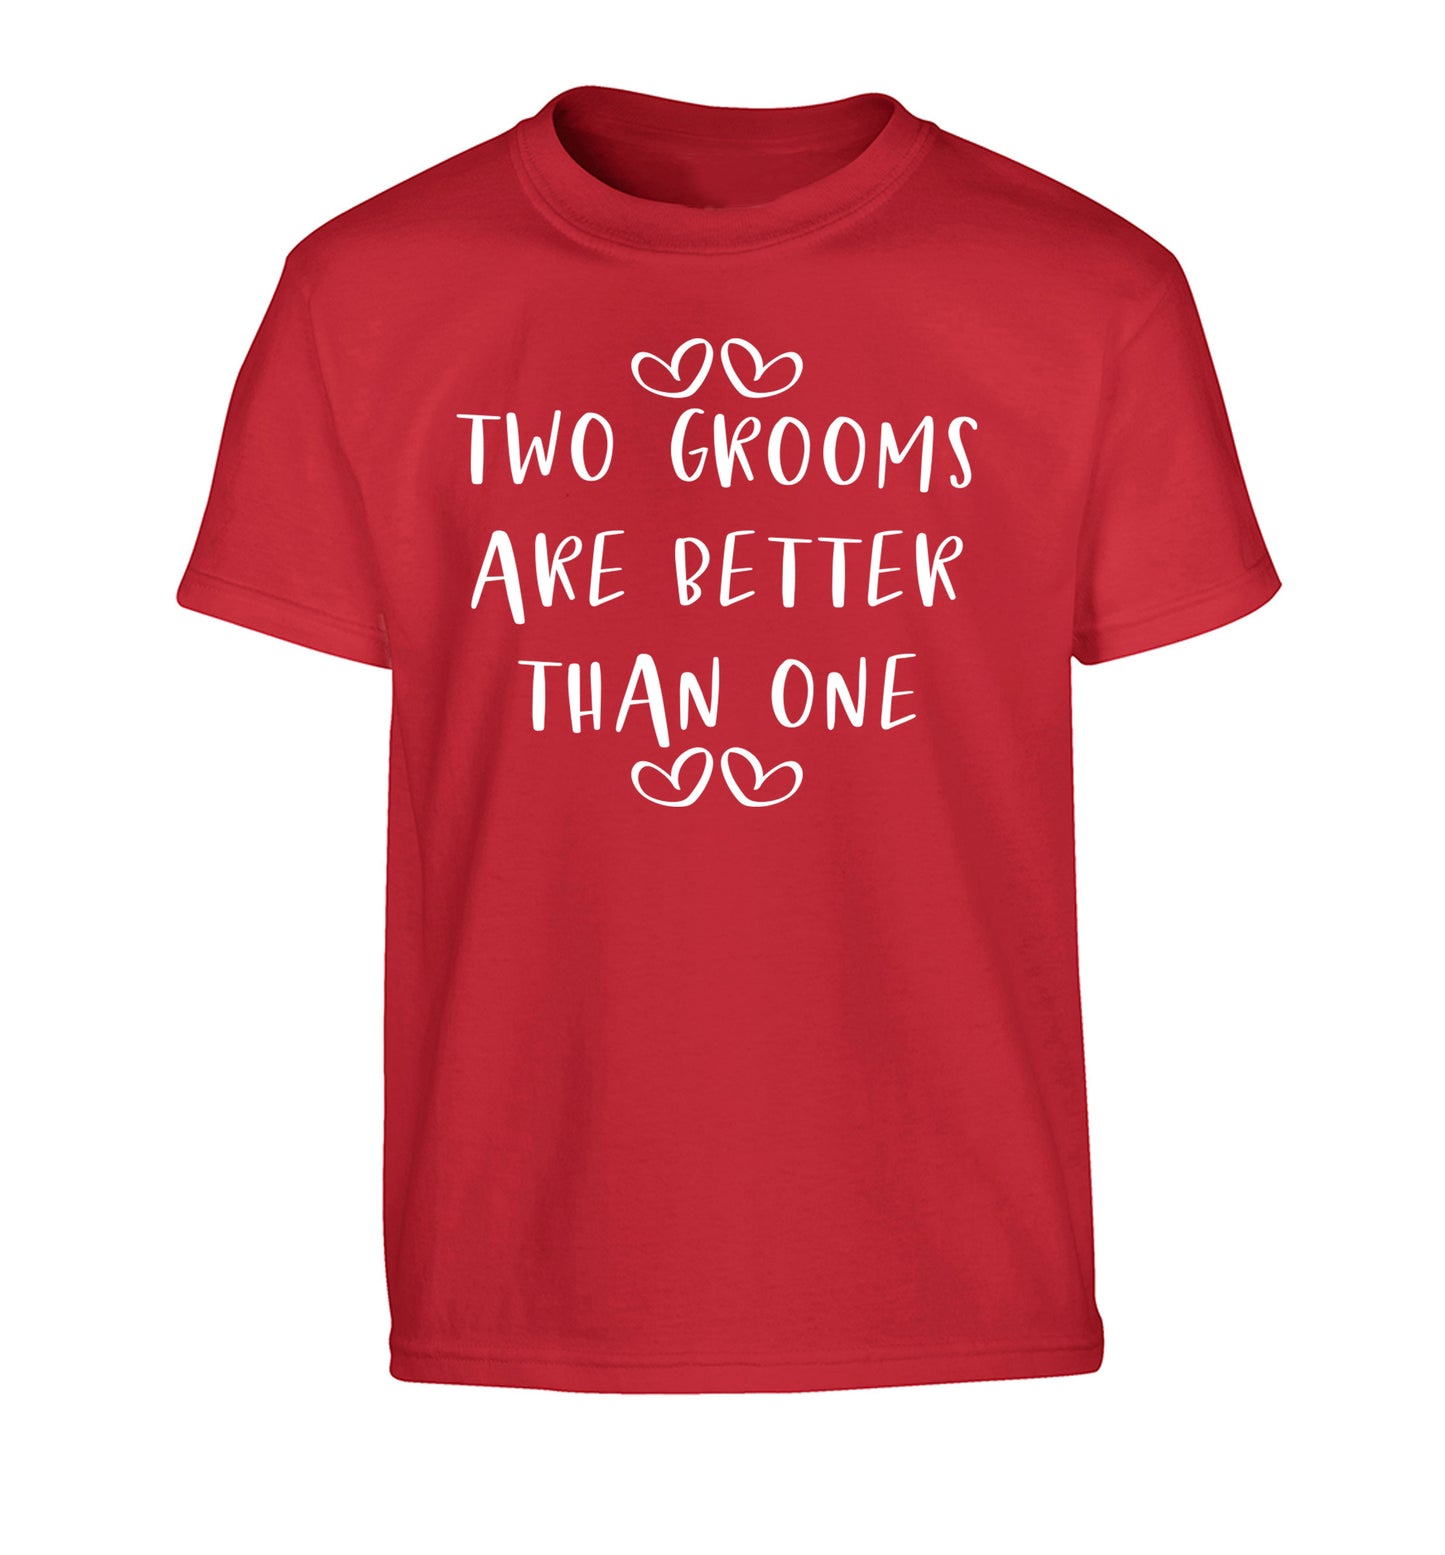 Two grooms are better than one Children's red Tshirt 12-13 Years